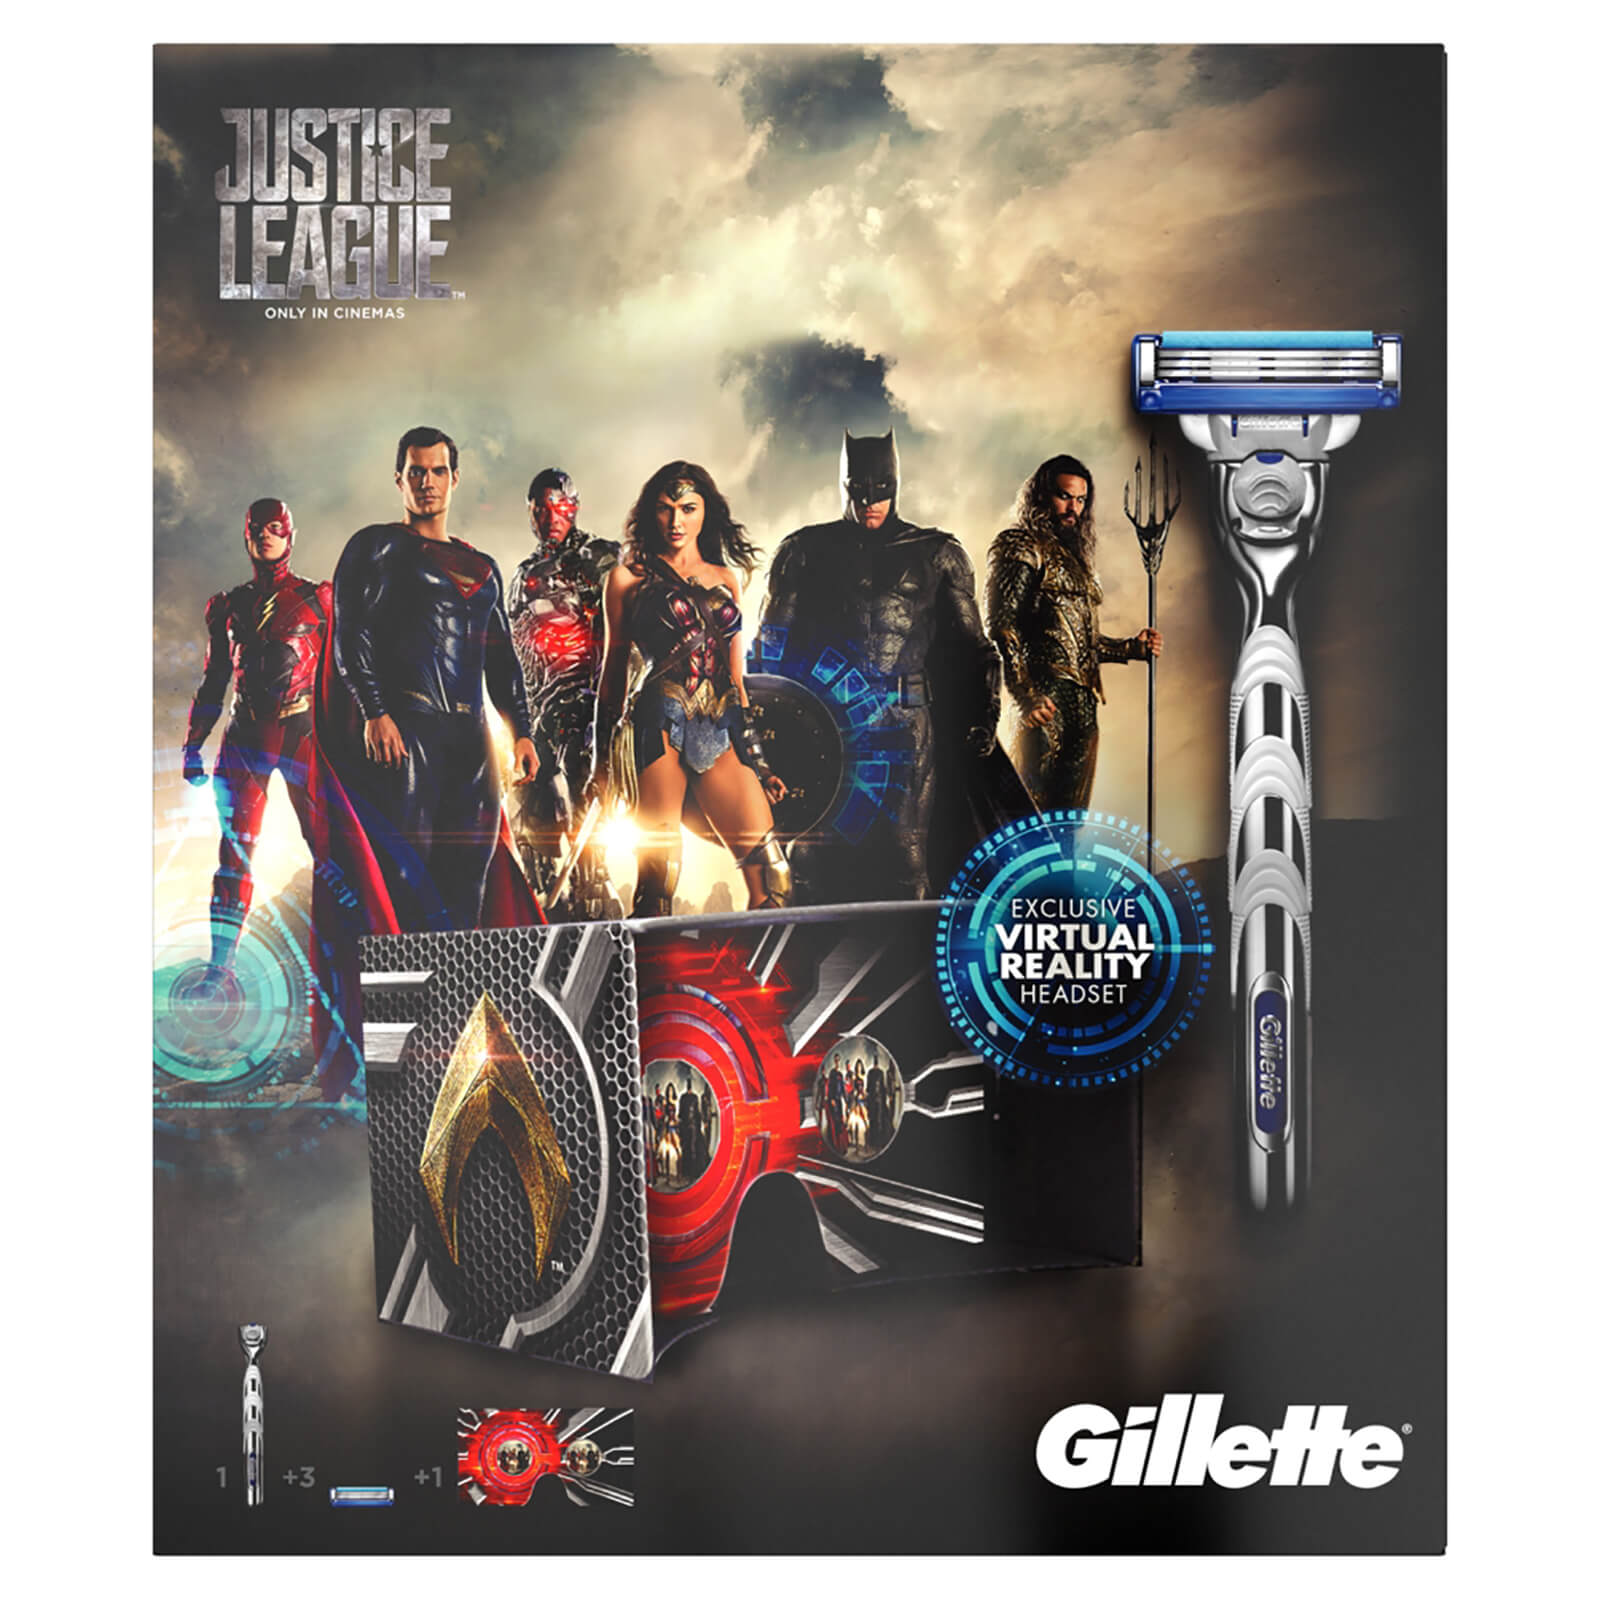 Gillette MACH3 Turbo Justic League Gift Set with VR Headset